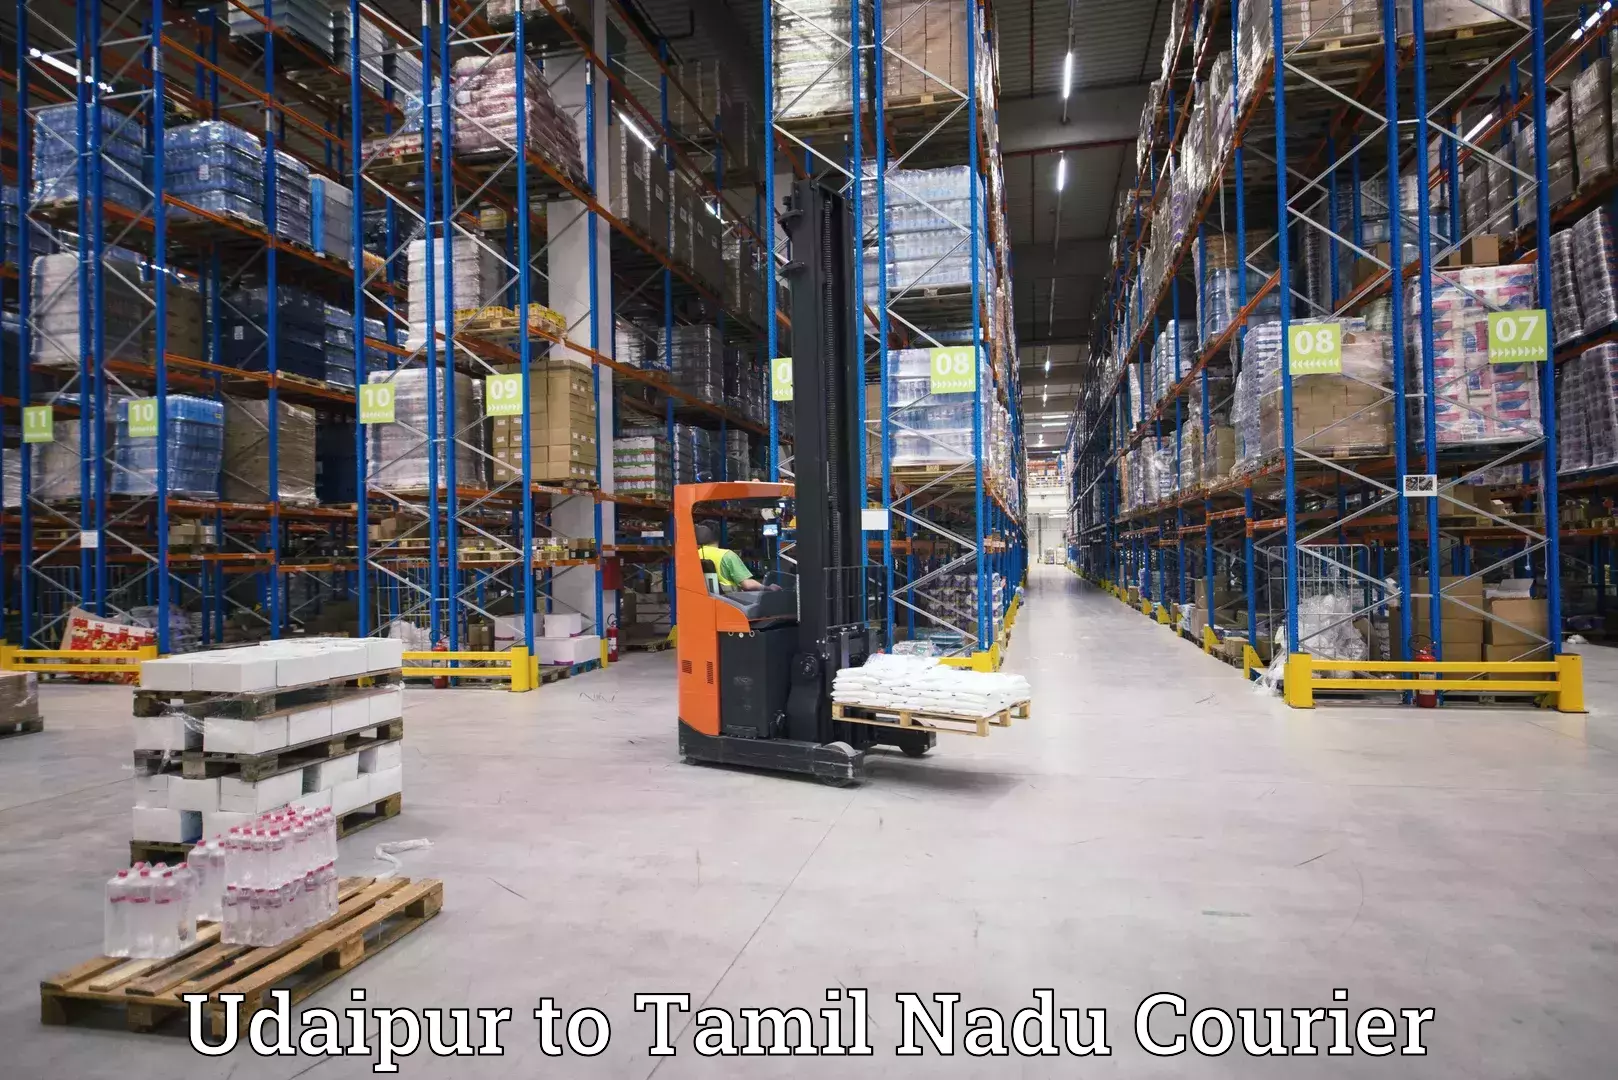 Nationwide delivery network Udaipur to Tuticorin Port